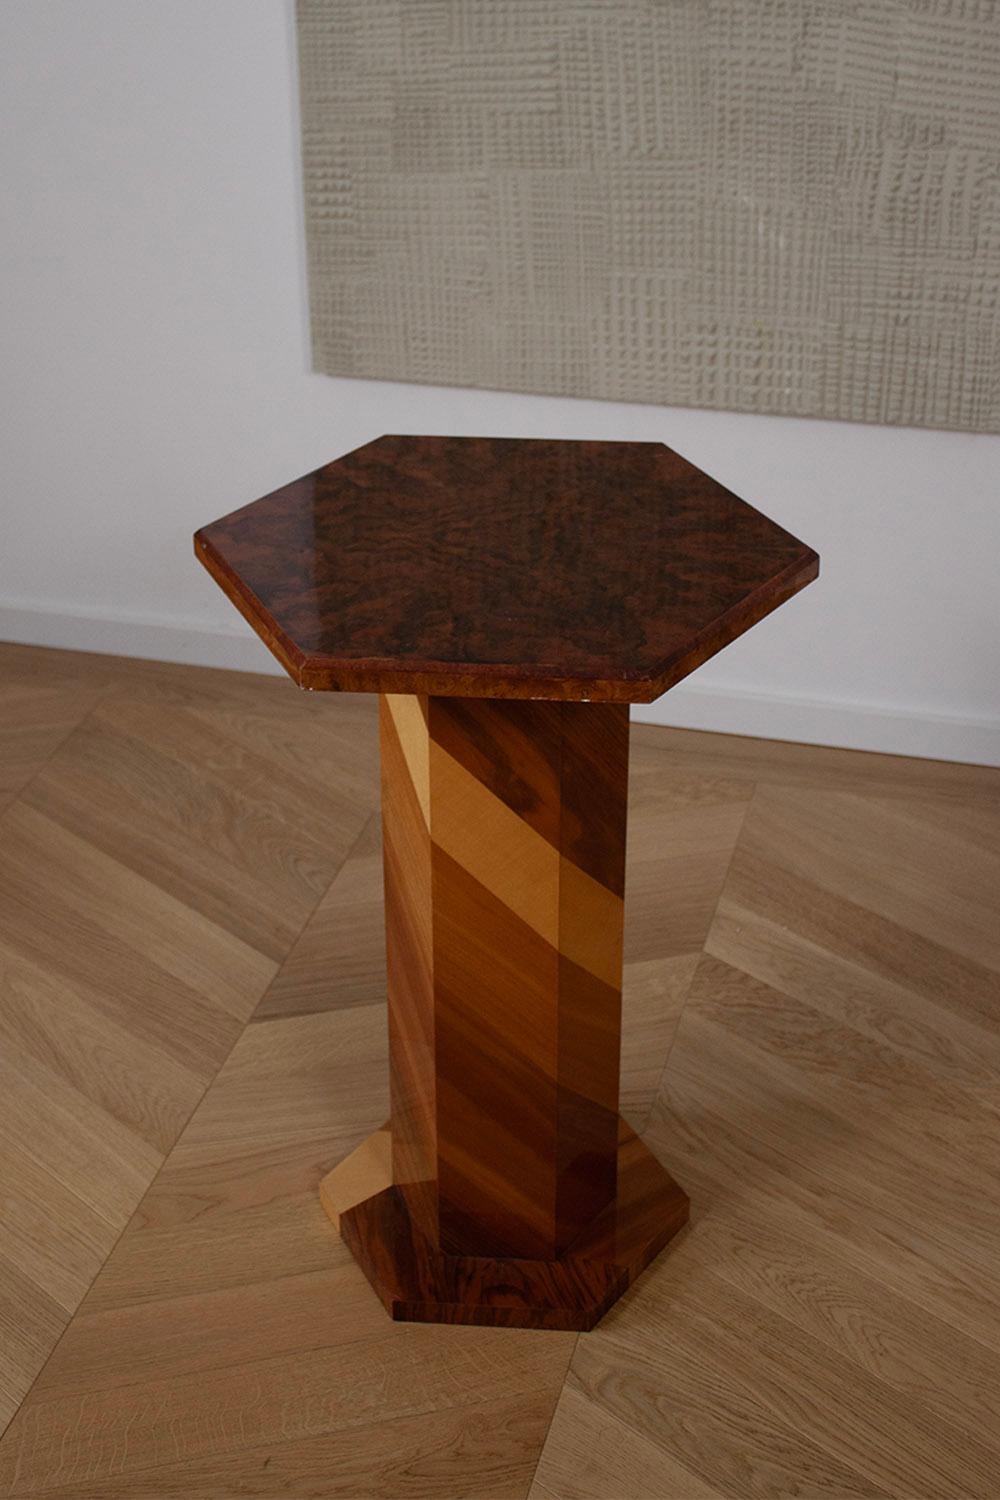 Striped Artisan Made Wooden Column Table Side Table Pedestal with Burl wood Top For Sale 1